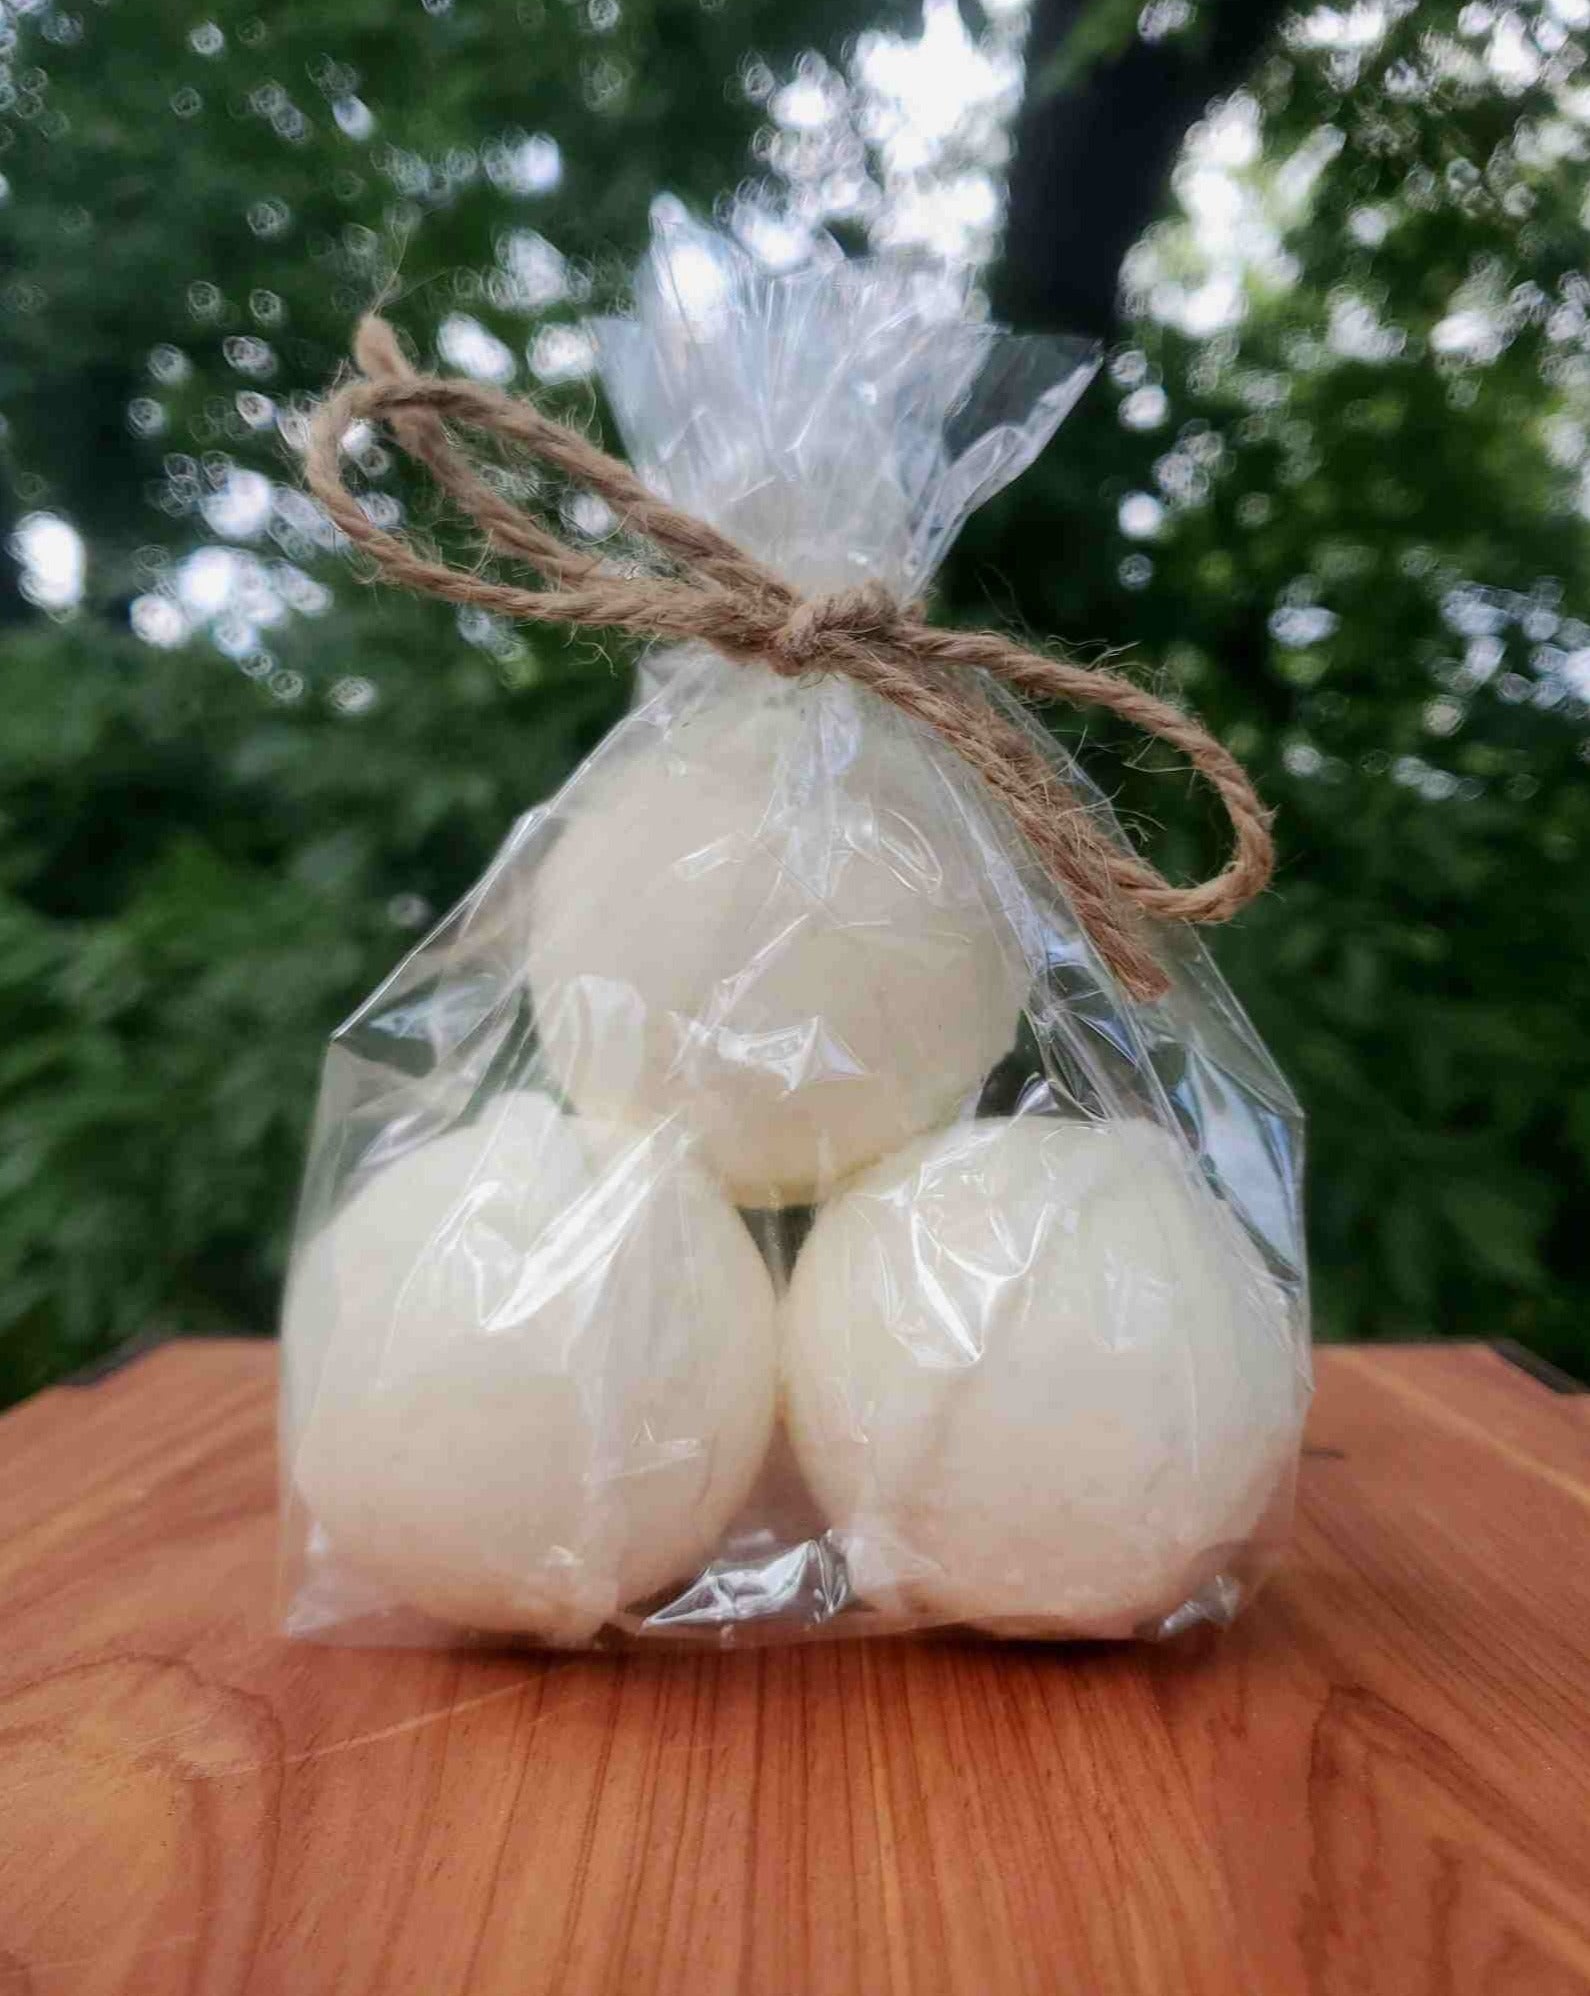 CBD bath bombs packaged in sustainable gift wrap outside